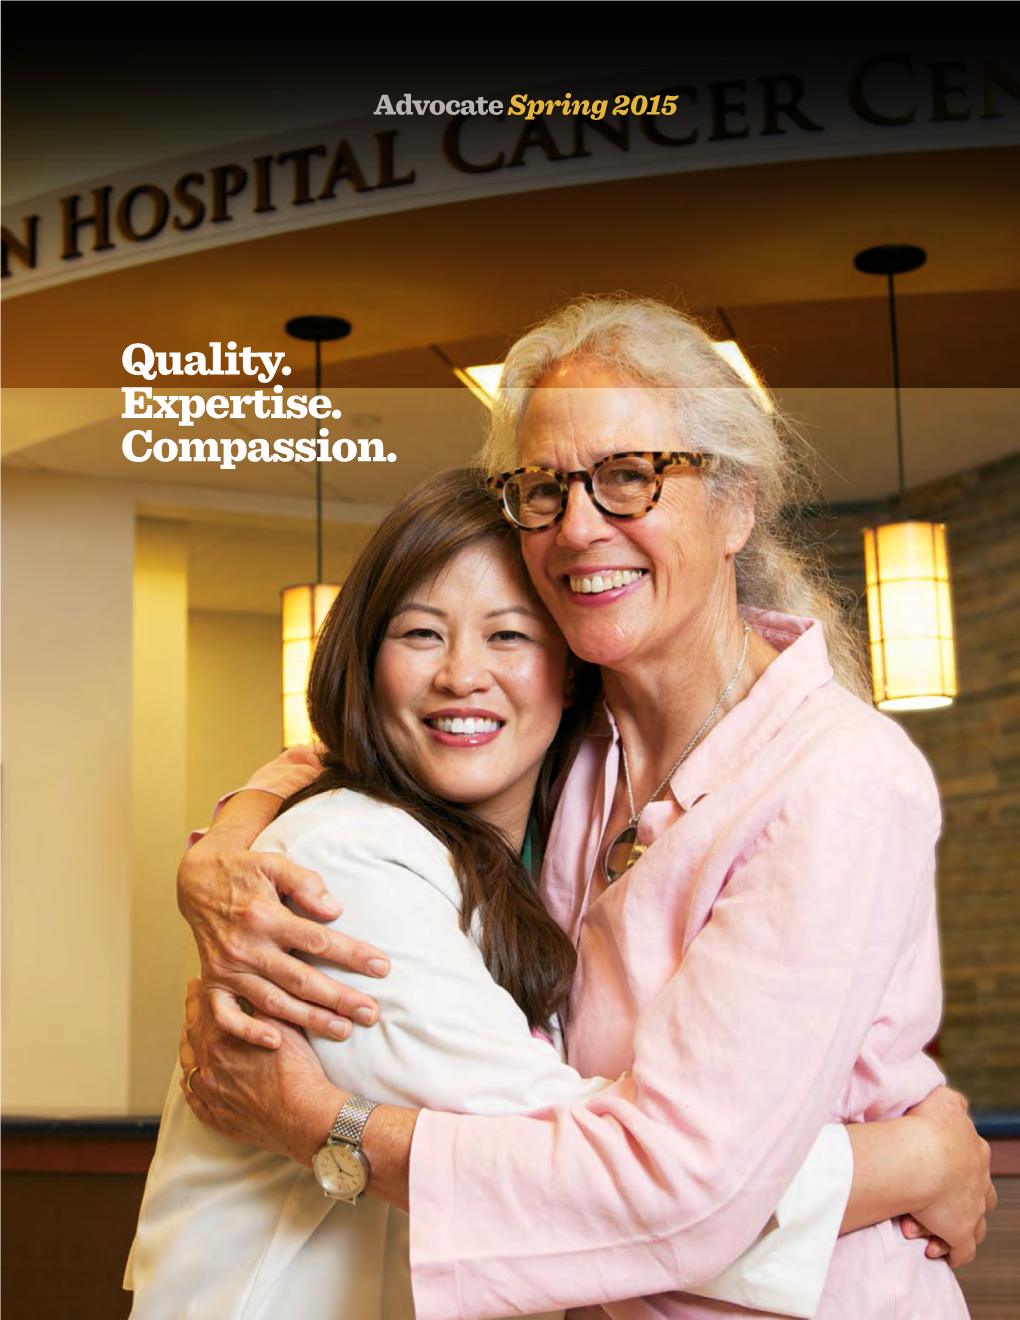 Quality. Expertise. Compassion. Our Mission